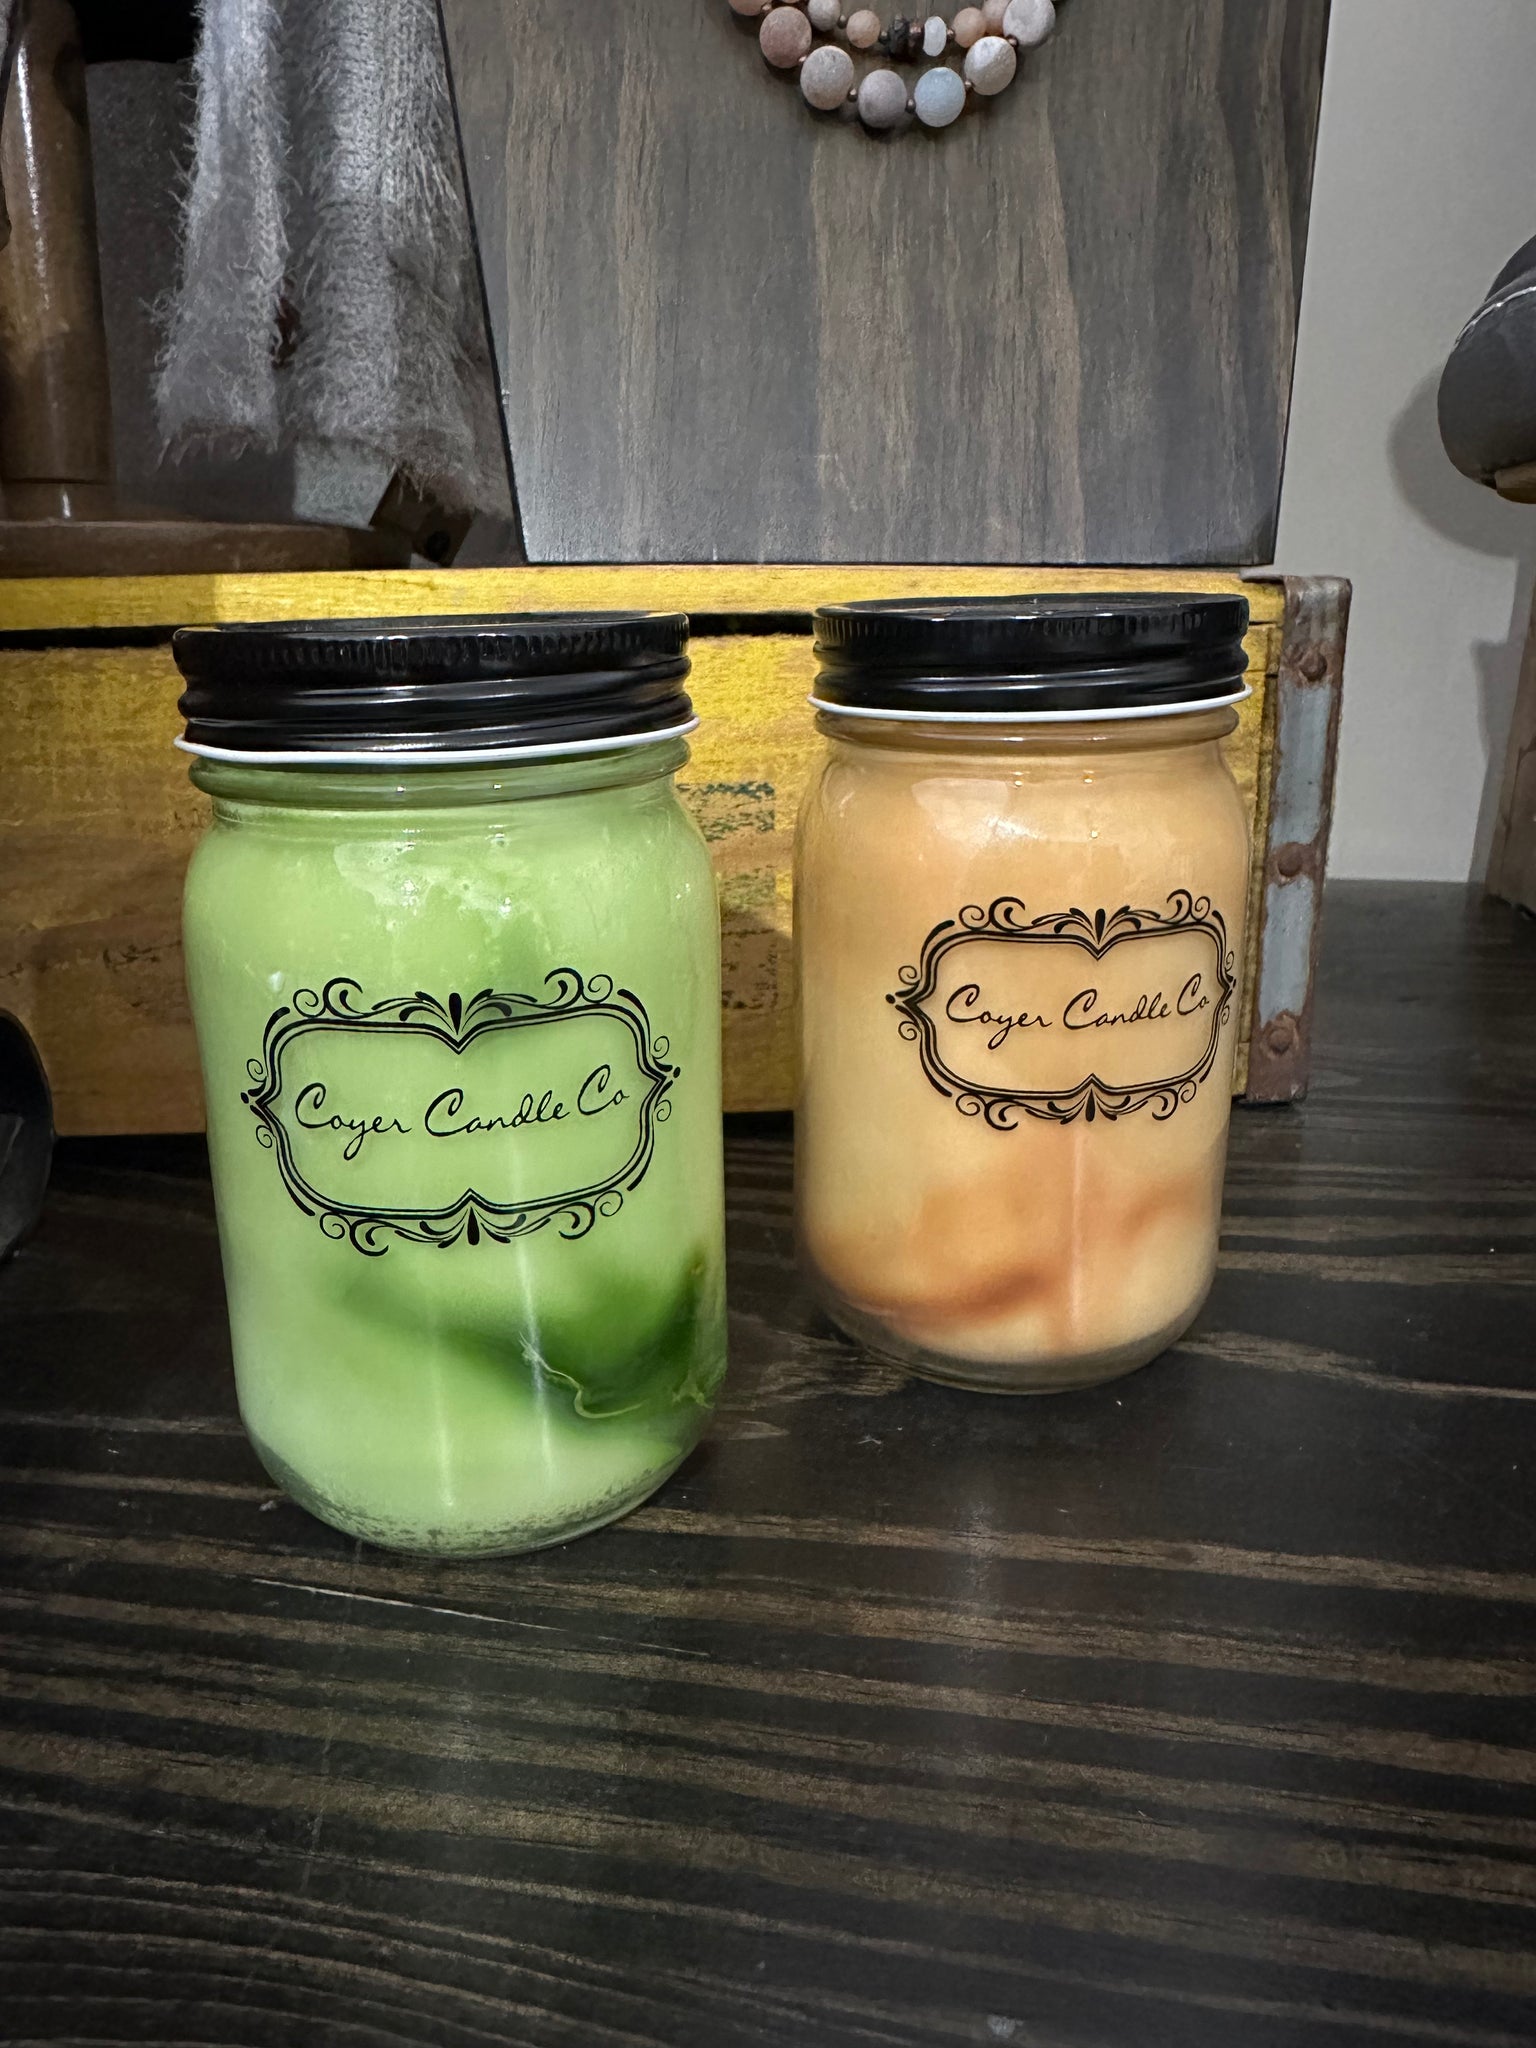 16 oz. Pint Mason Jar Candles by Coyer Candle Co.